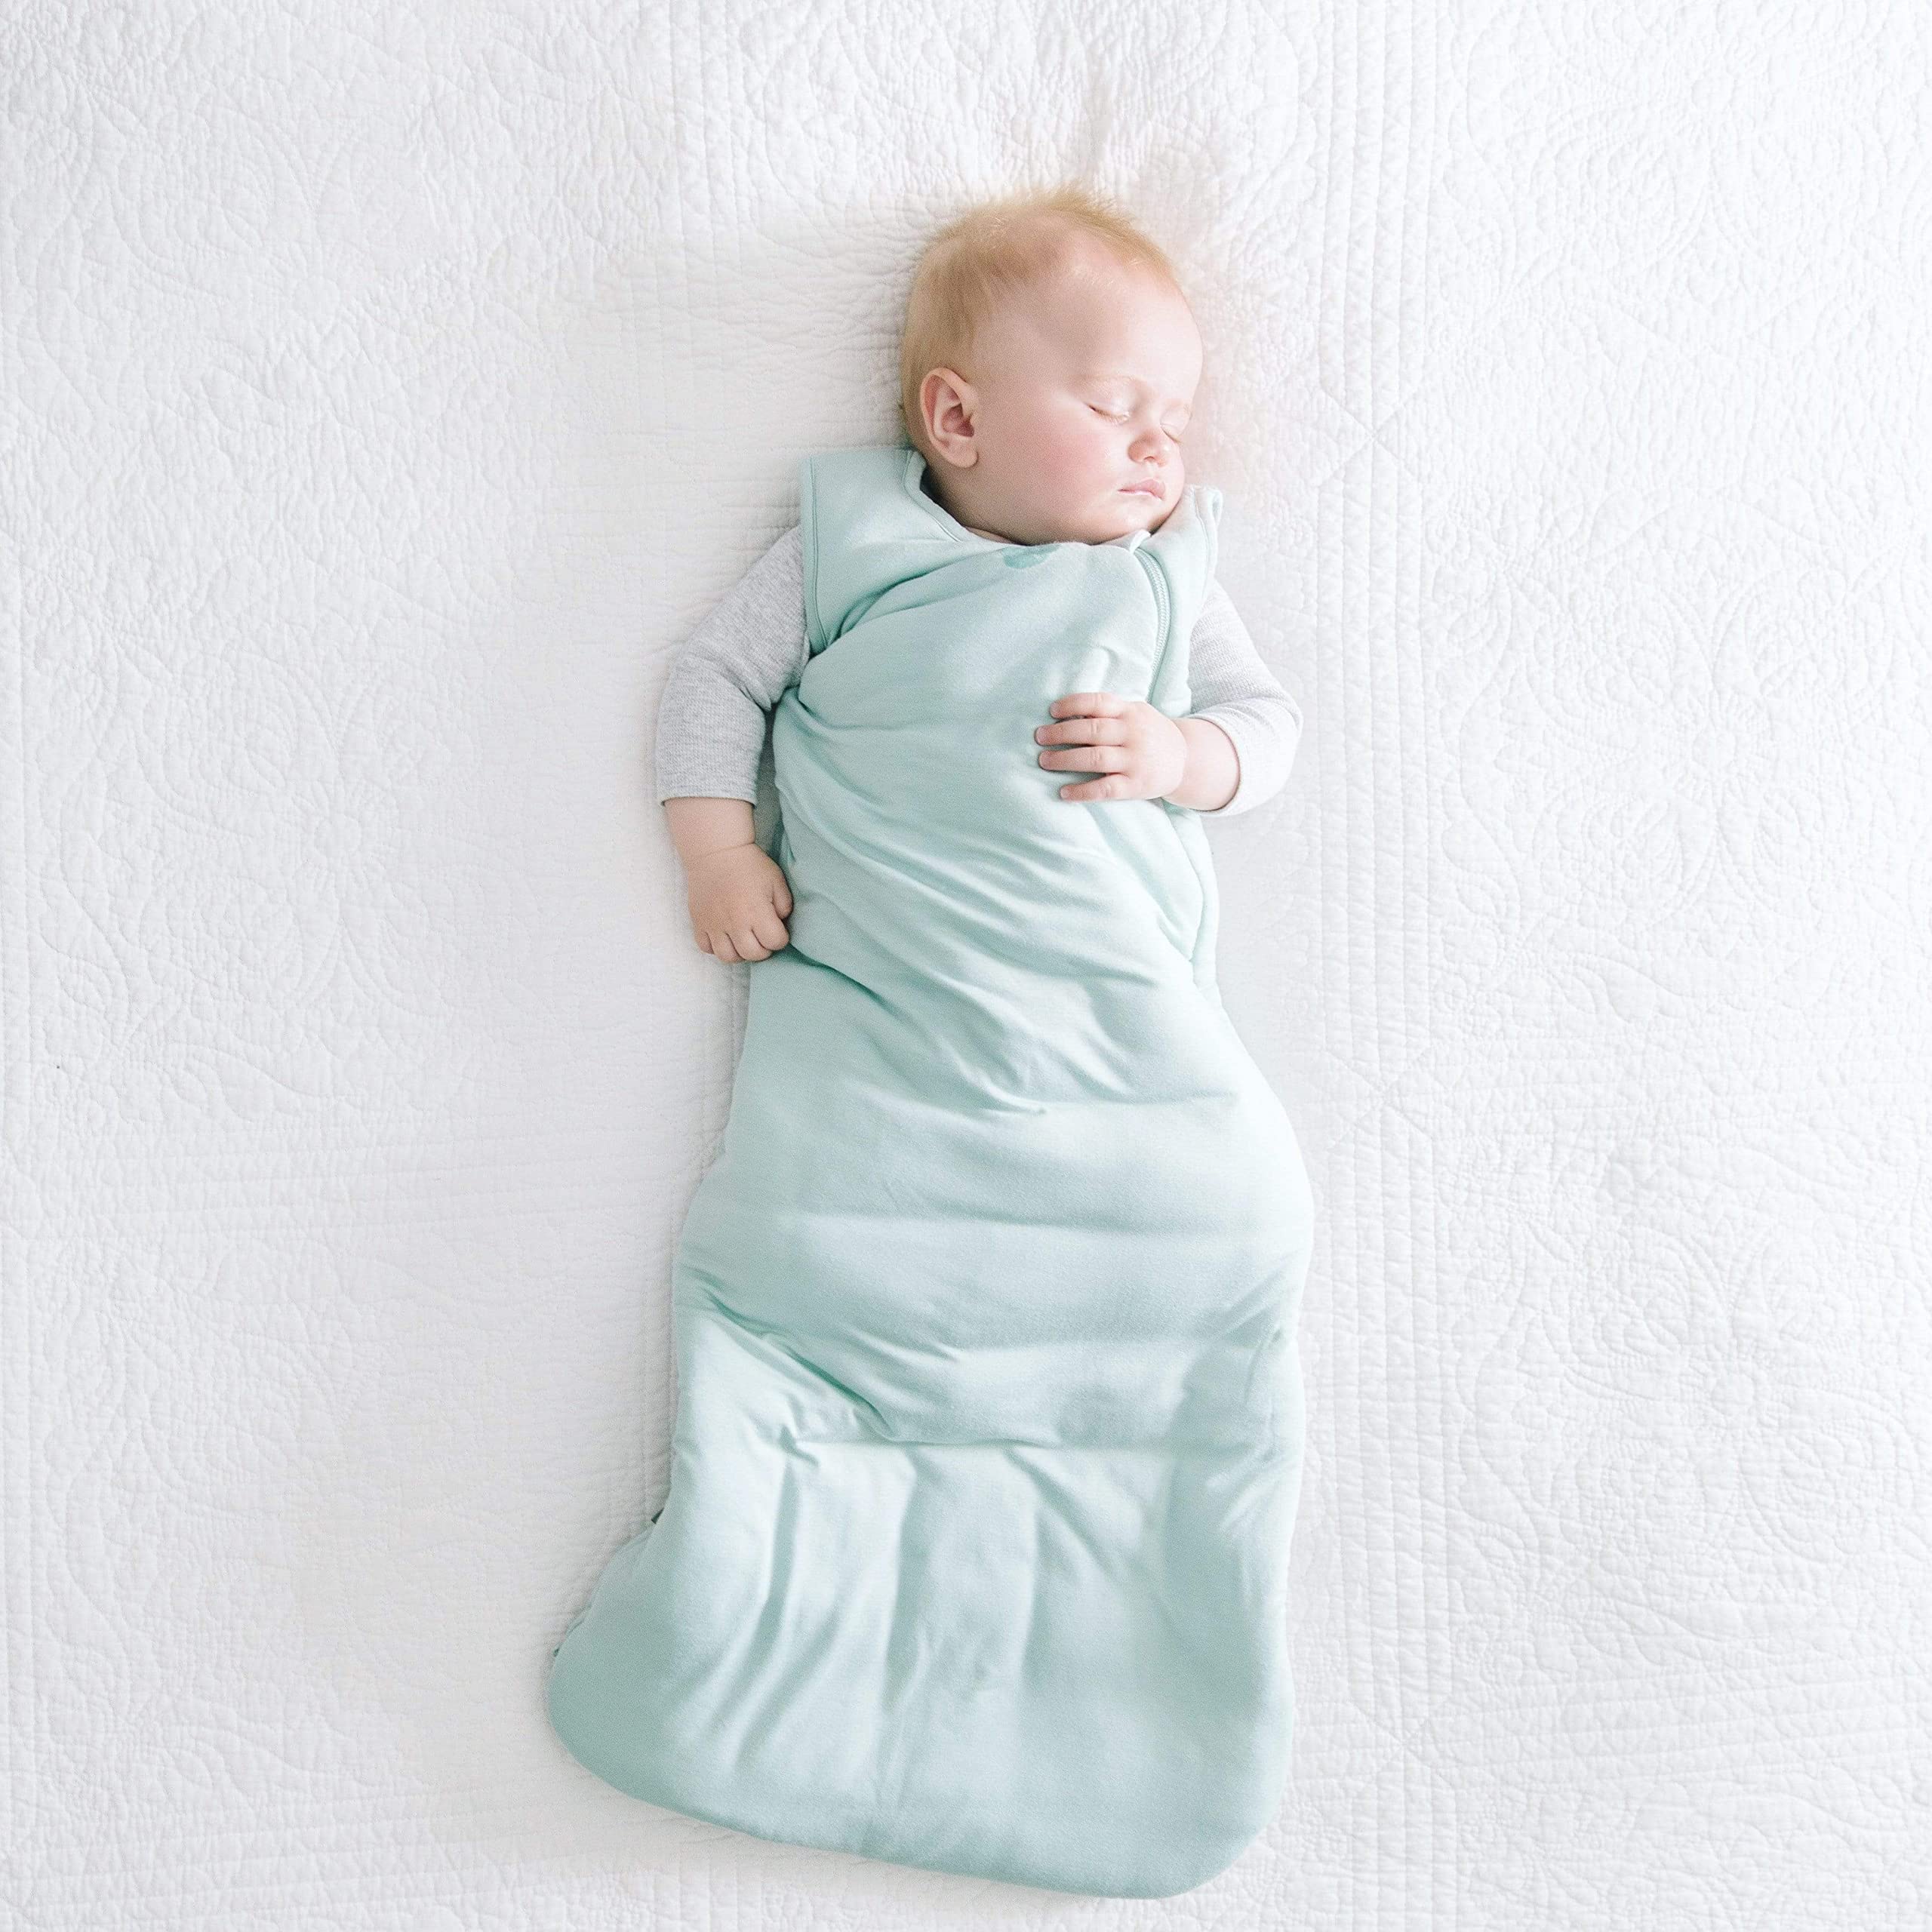 KYTE BABY Unisex Rayon Made From Bamboo Sleep Bag for Babies and Toddlers, 1.0 Tog (Medium, Sage)